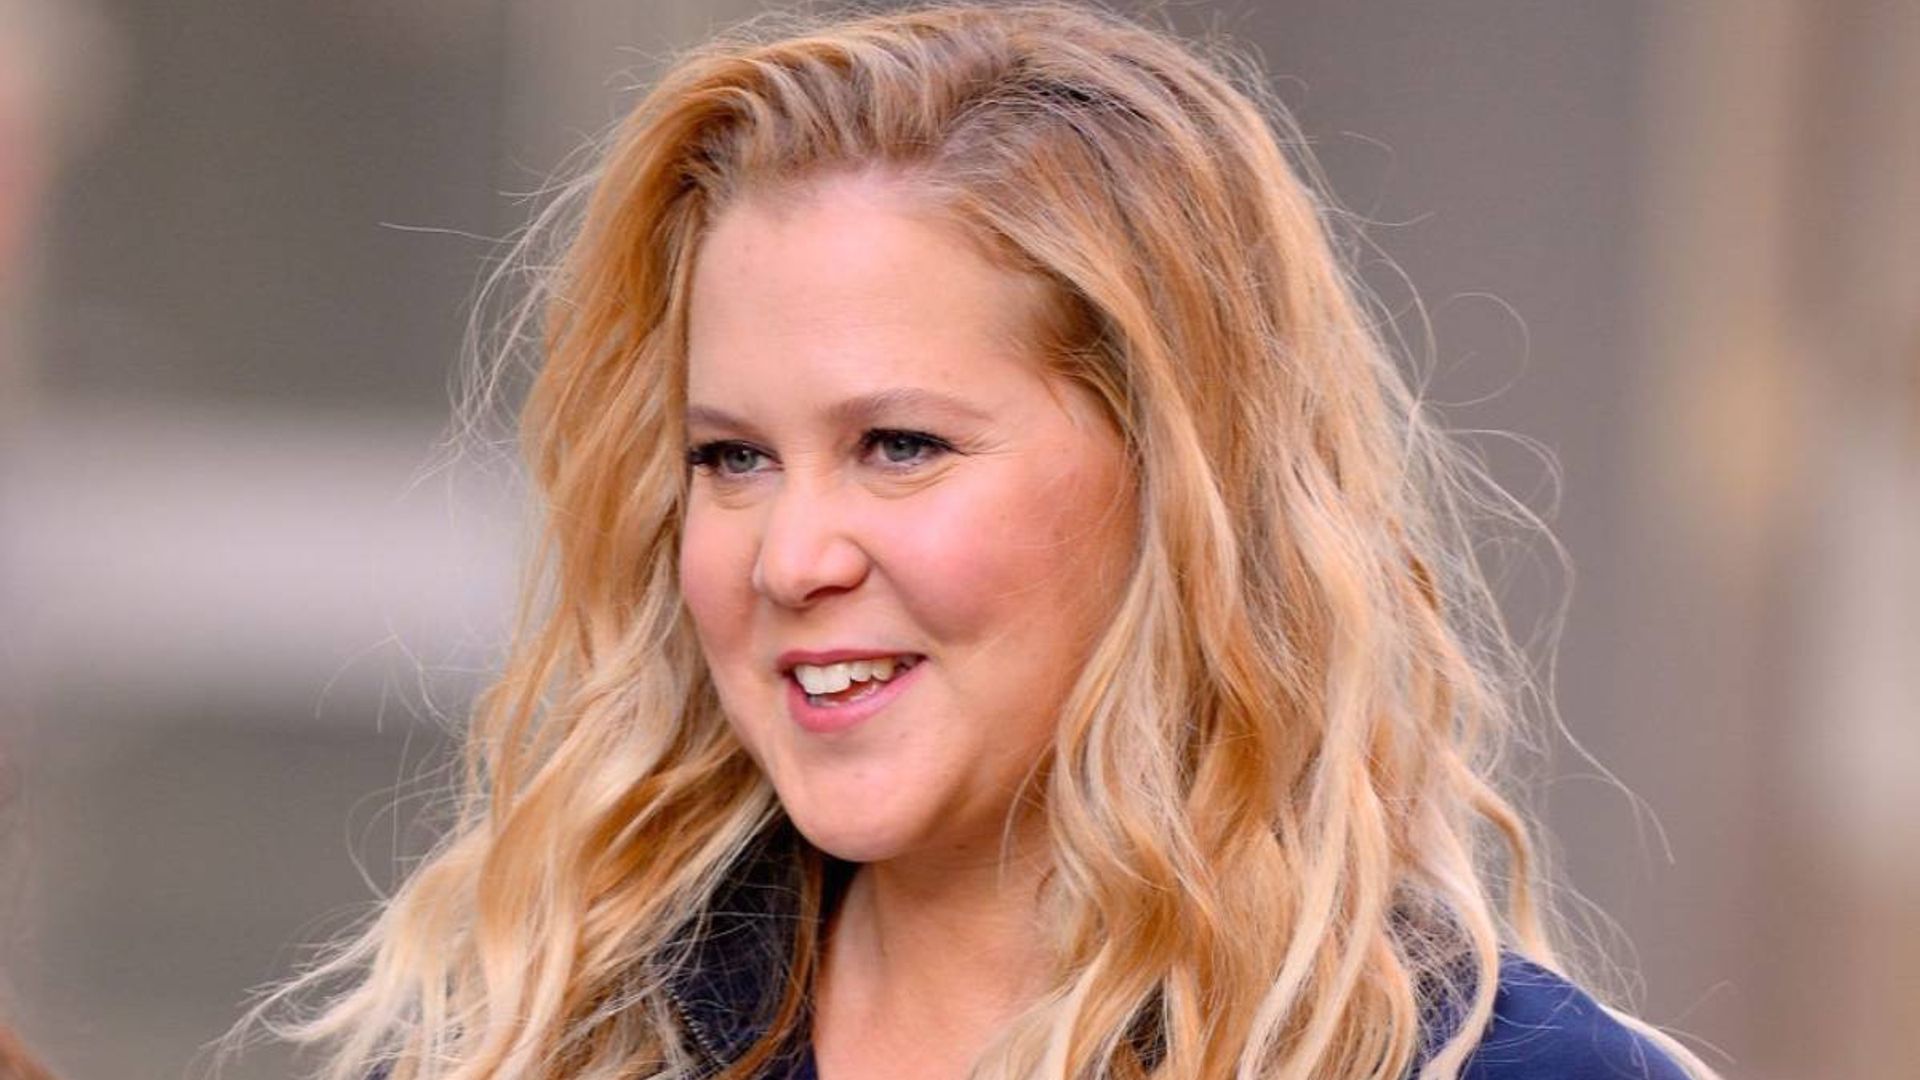 Amy Schumer Sparks Pregnancy Speculation With Unexpected Photo Hello 